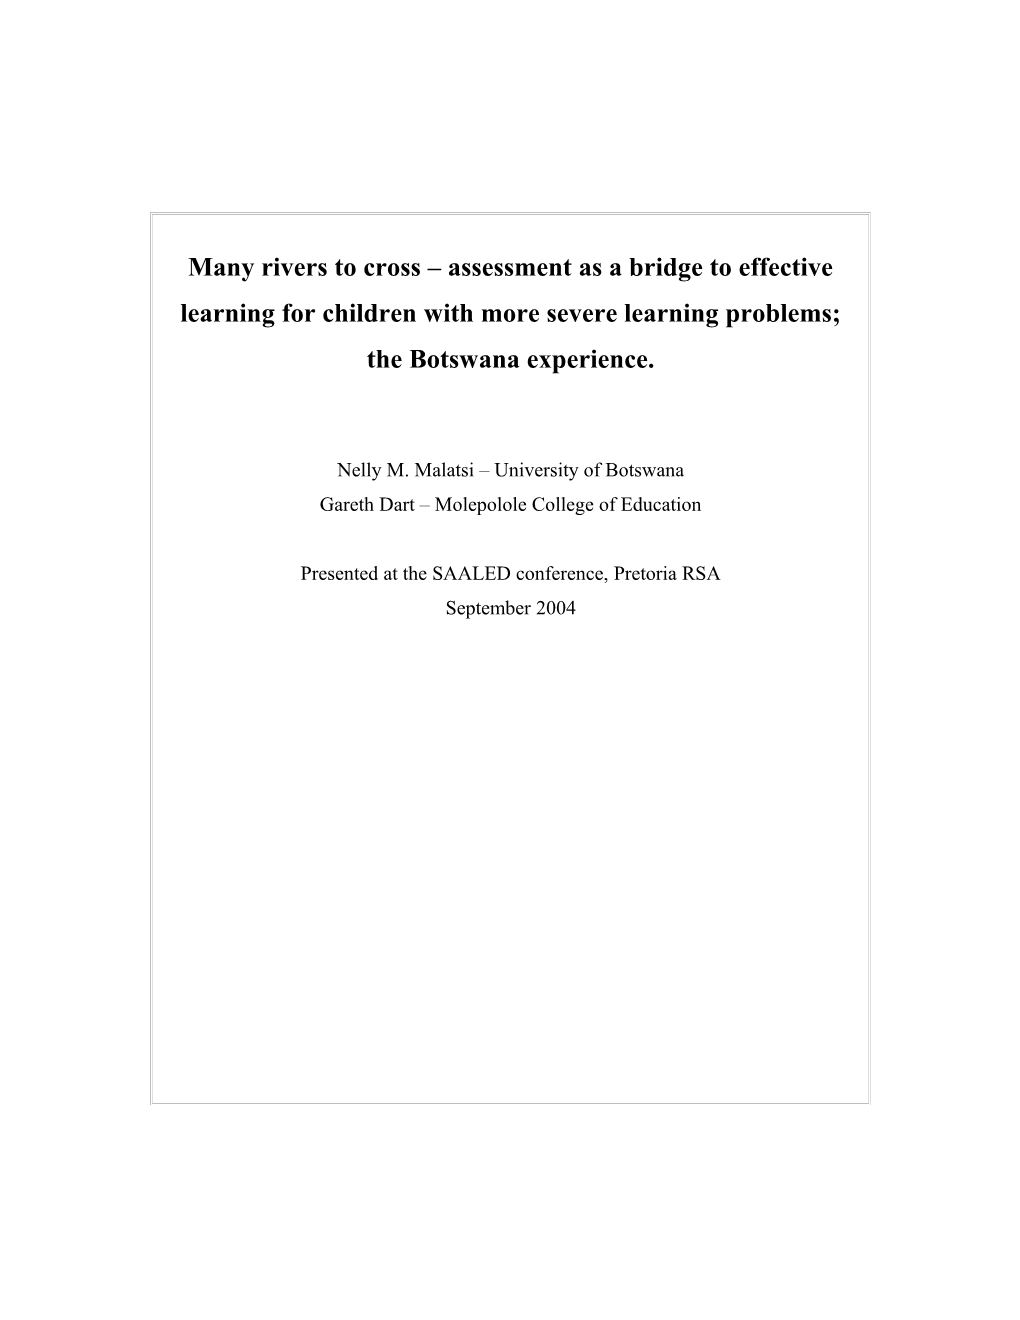 Many Rivers to Cross Assessment As a Bridge to Effective Learning for Children with More